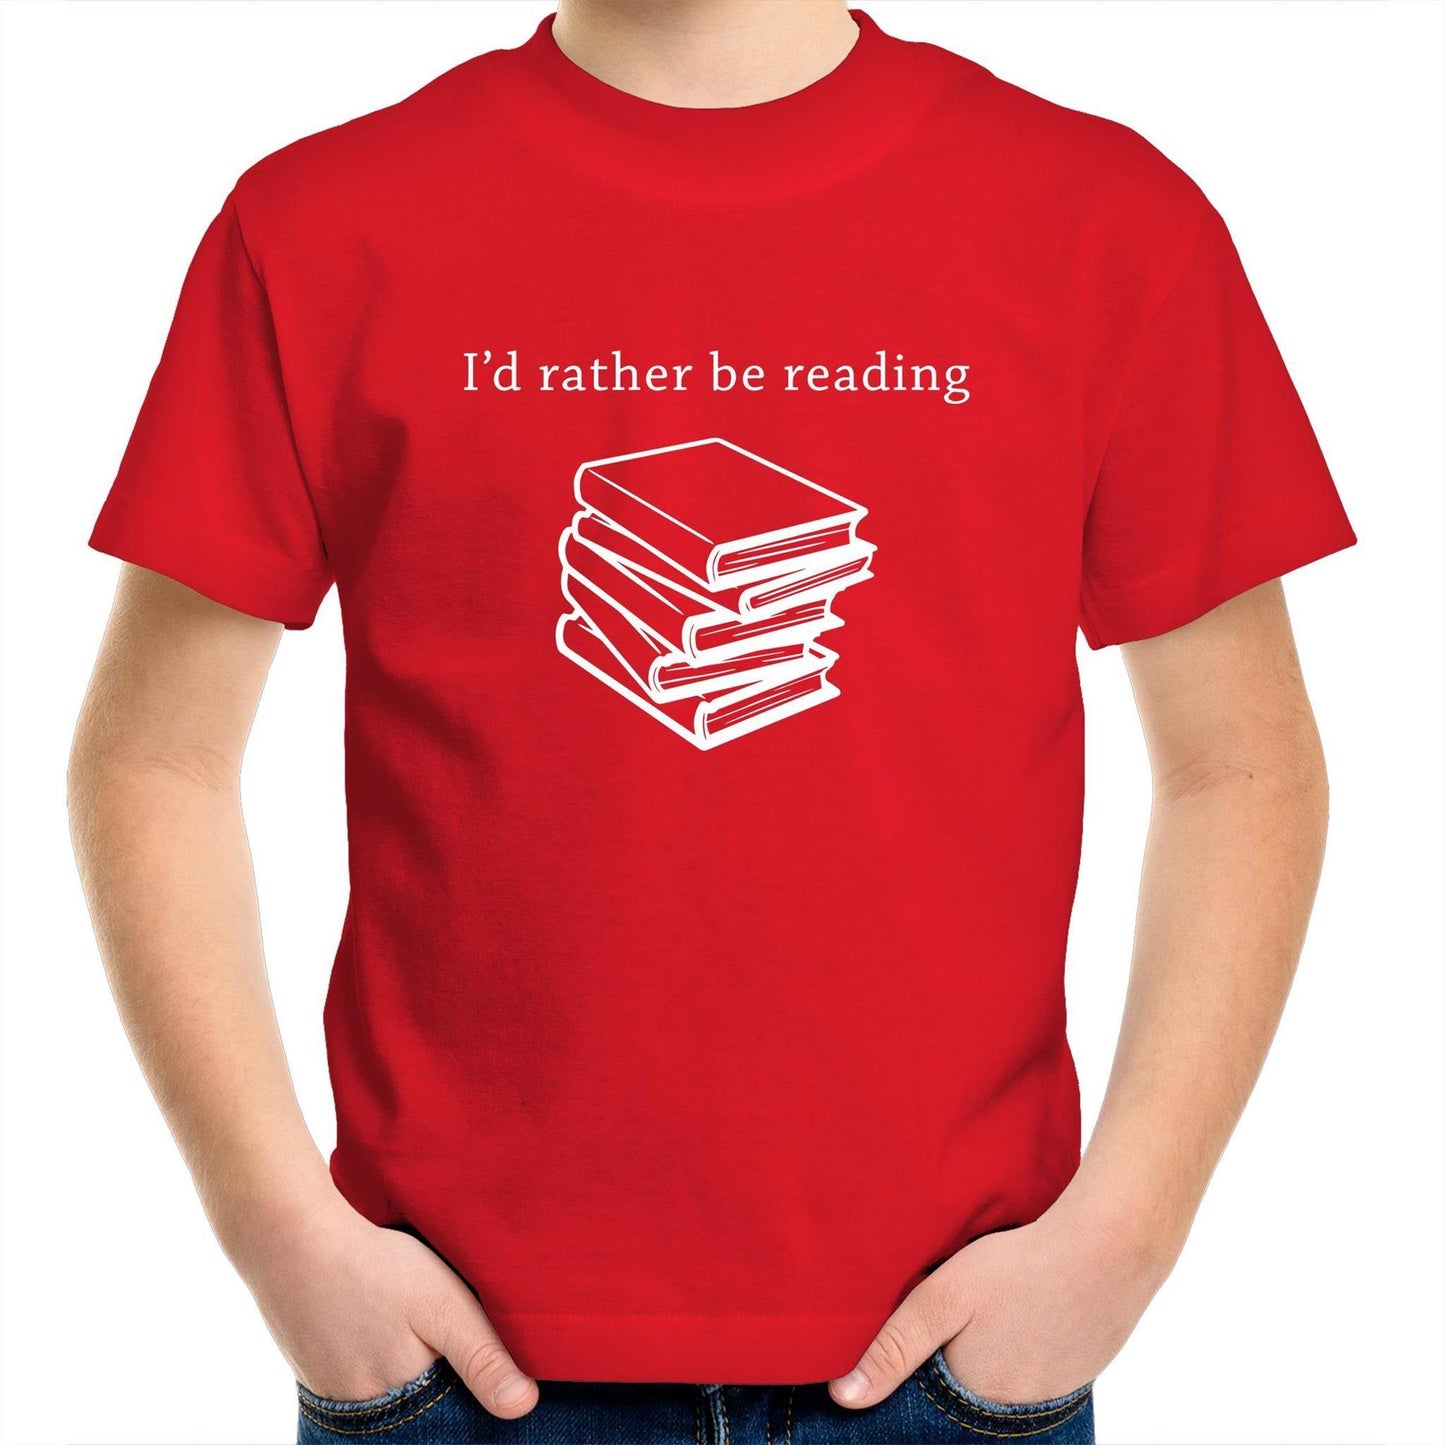 I'd Rather Be Reading - Kids Youth Crew T-Shirt Red Kids Youth T-shirt Funny